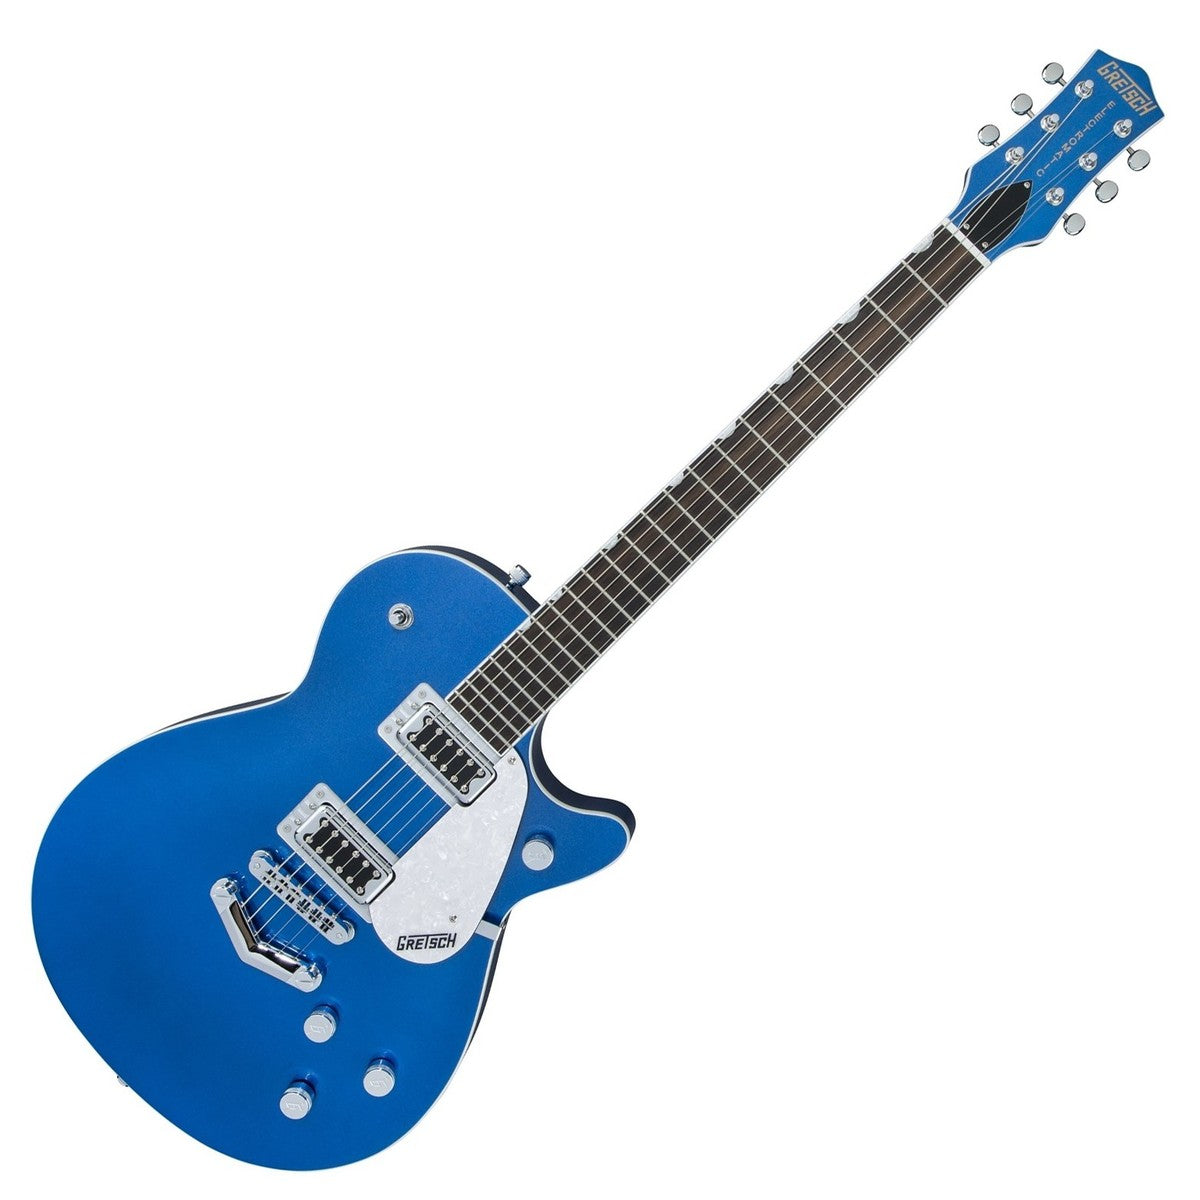 Gretsch G5435 Limited Edition Electromatic Pro Jet Electric Guitar, Fairlane Blue